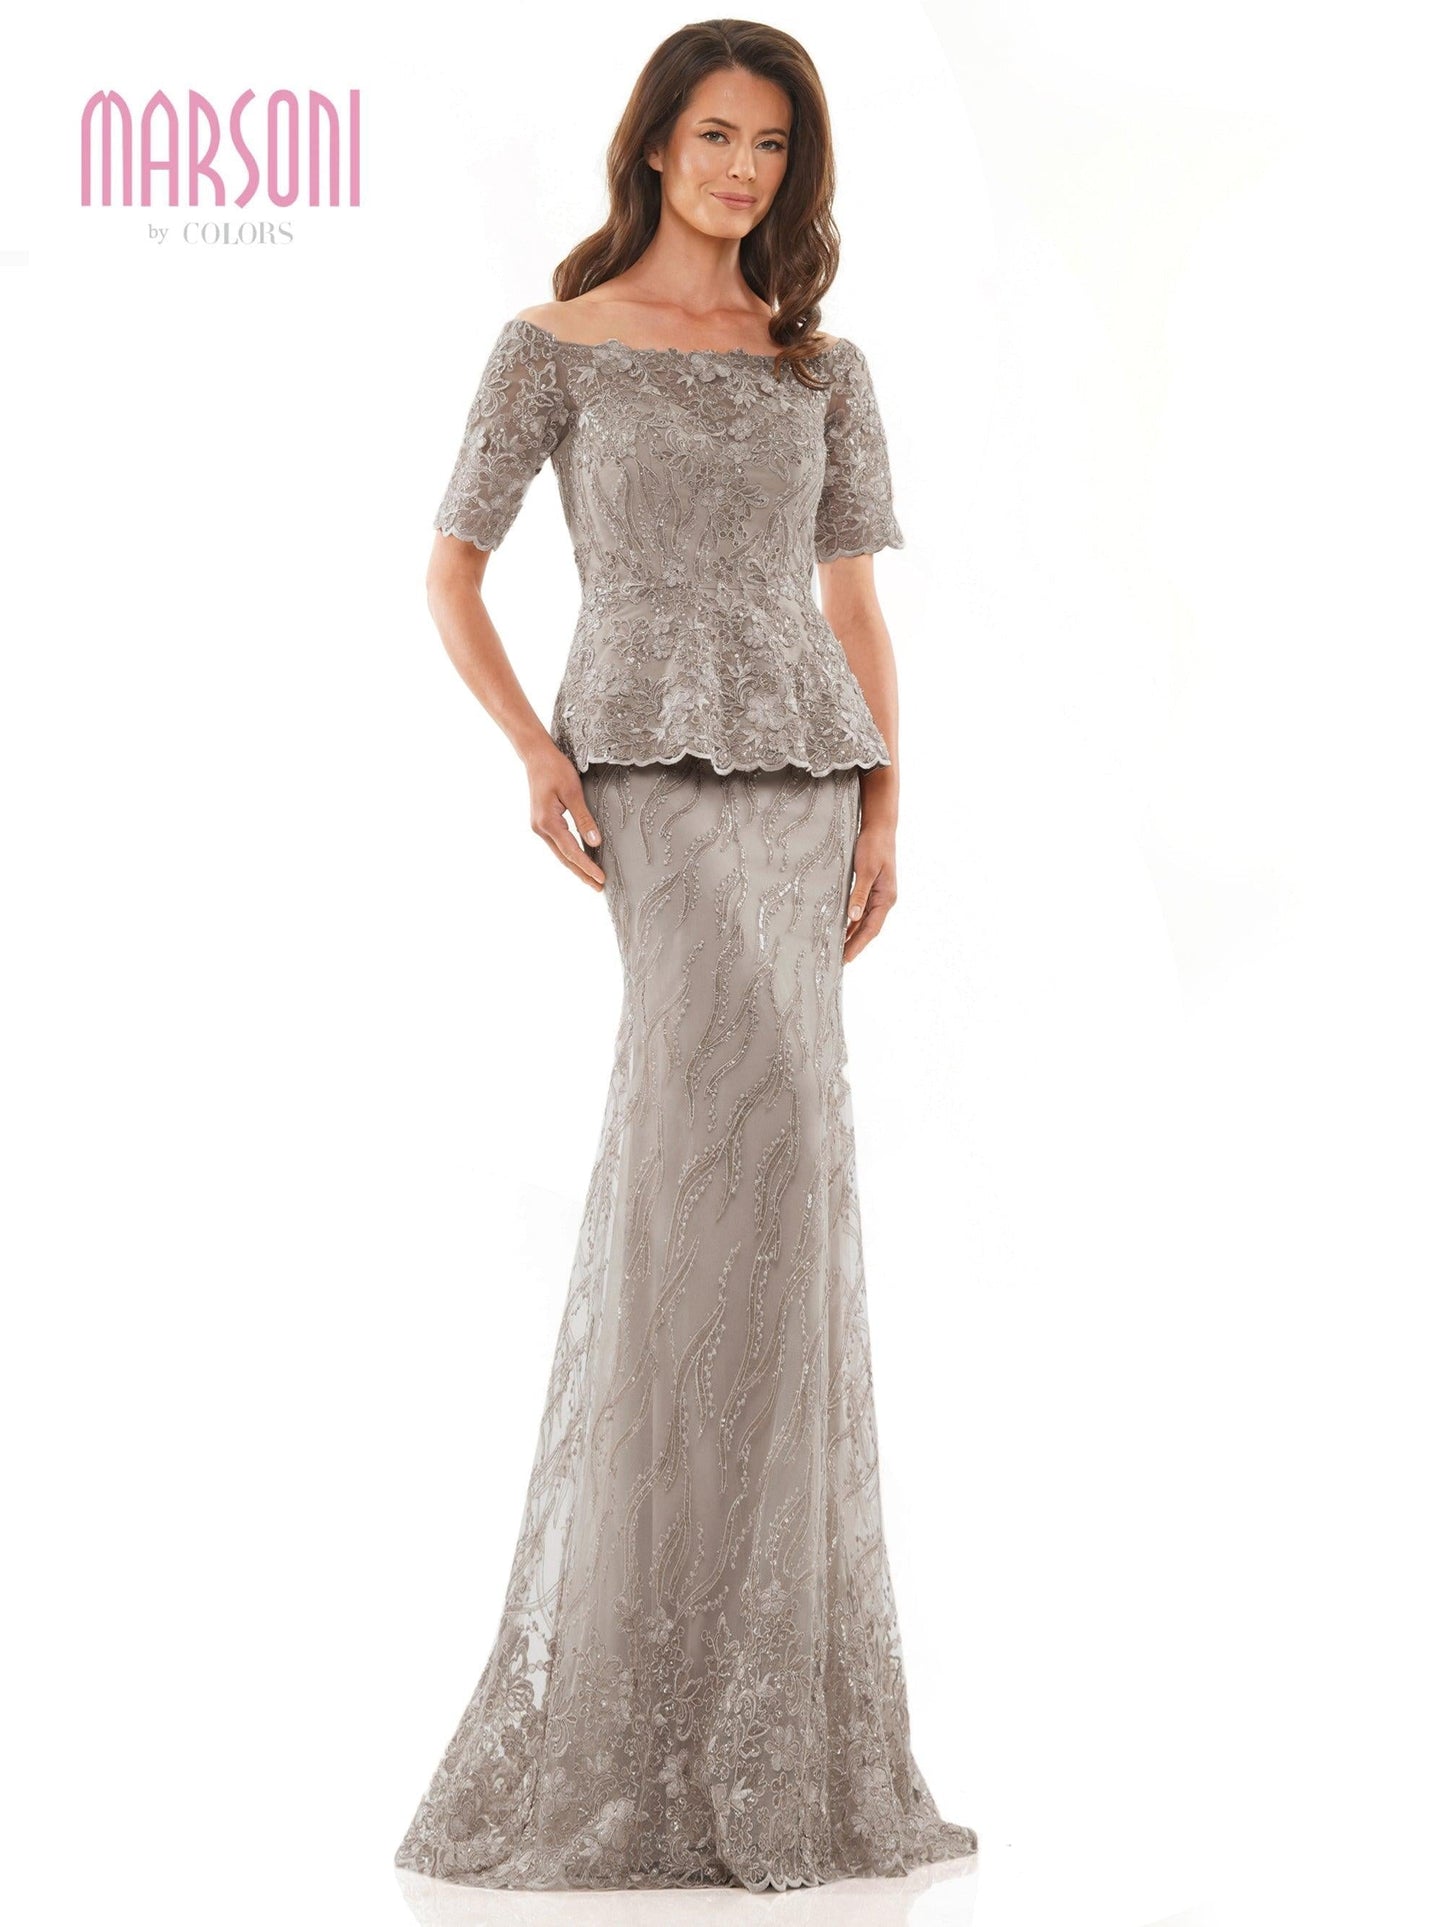 Marsoni Long Mother of the Bride Formal Gown 1222 - The Dress Outlet